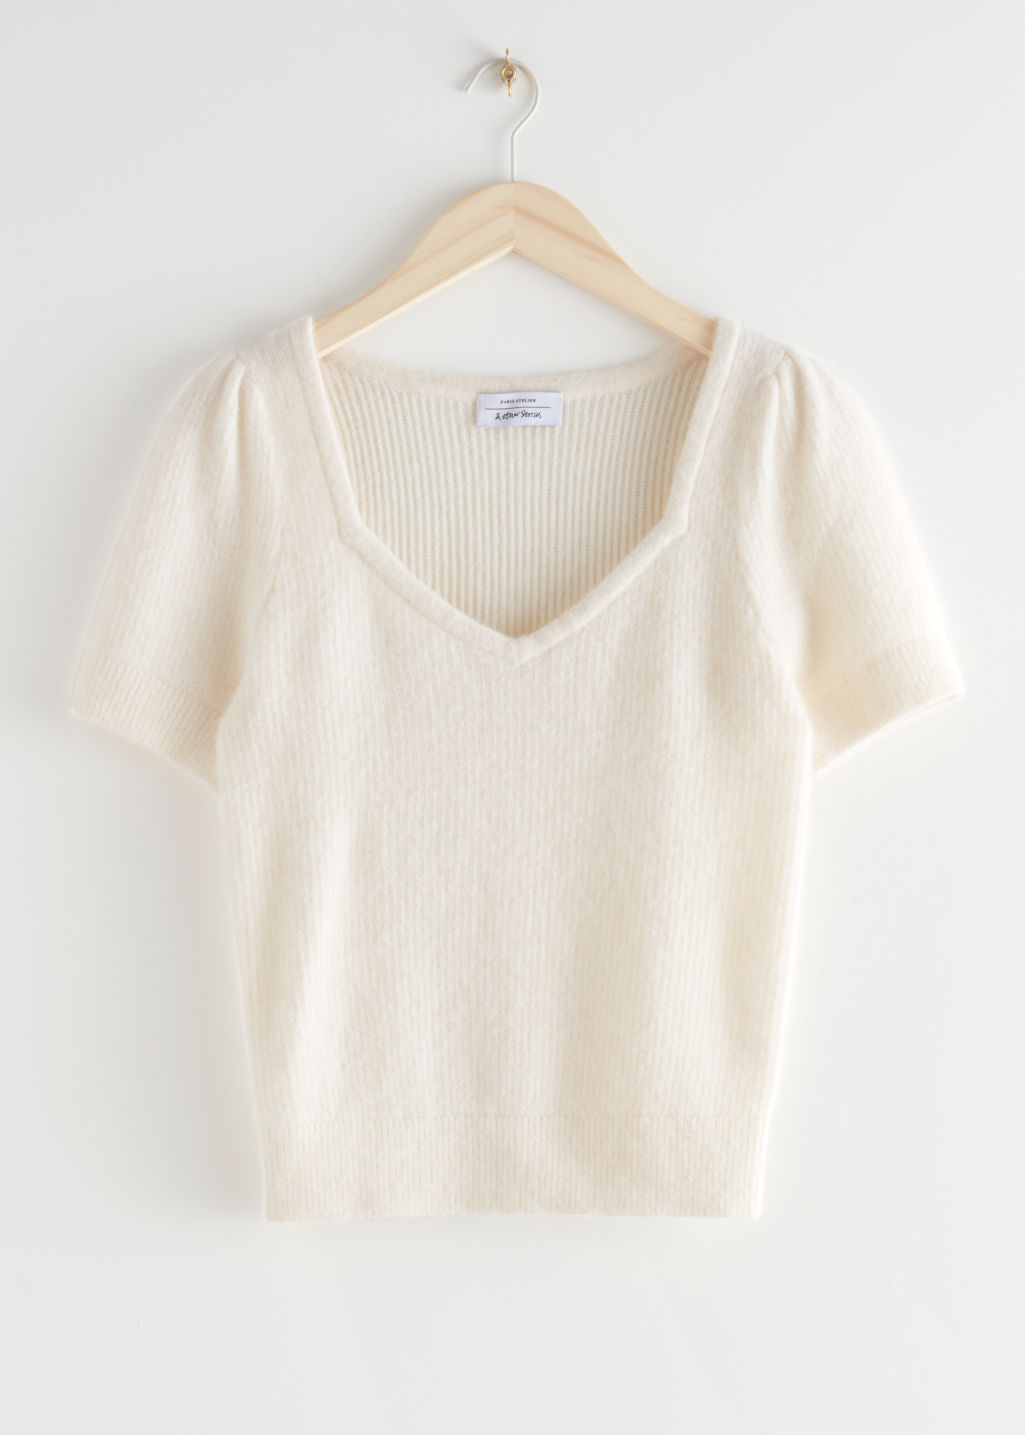 Sweetheart Neck Knit Sweater - Creme - Tops & T-shirts - & Other Stories